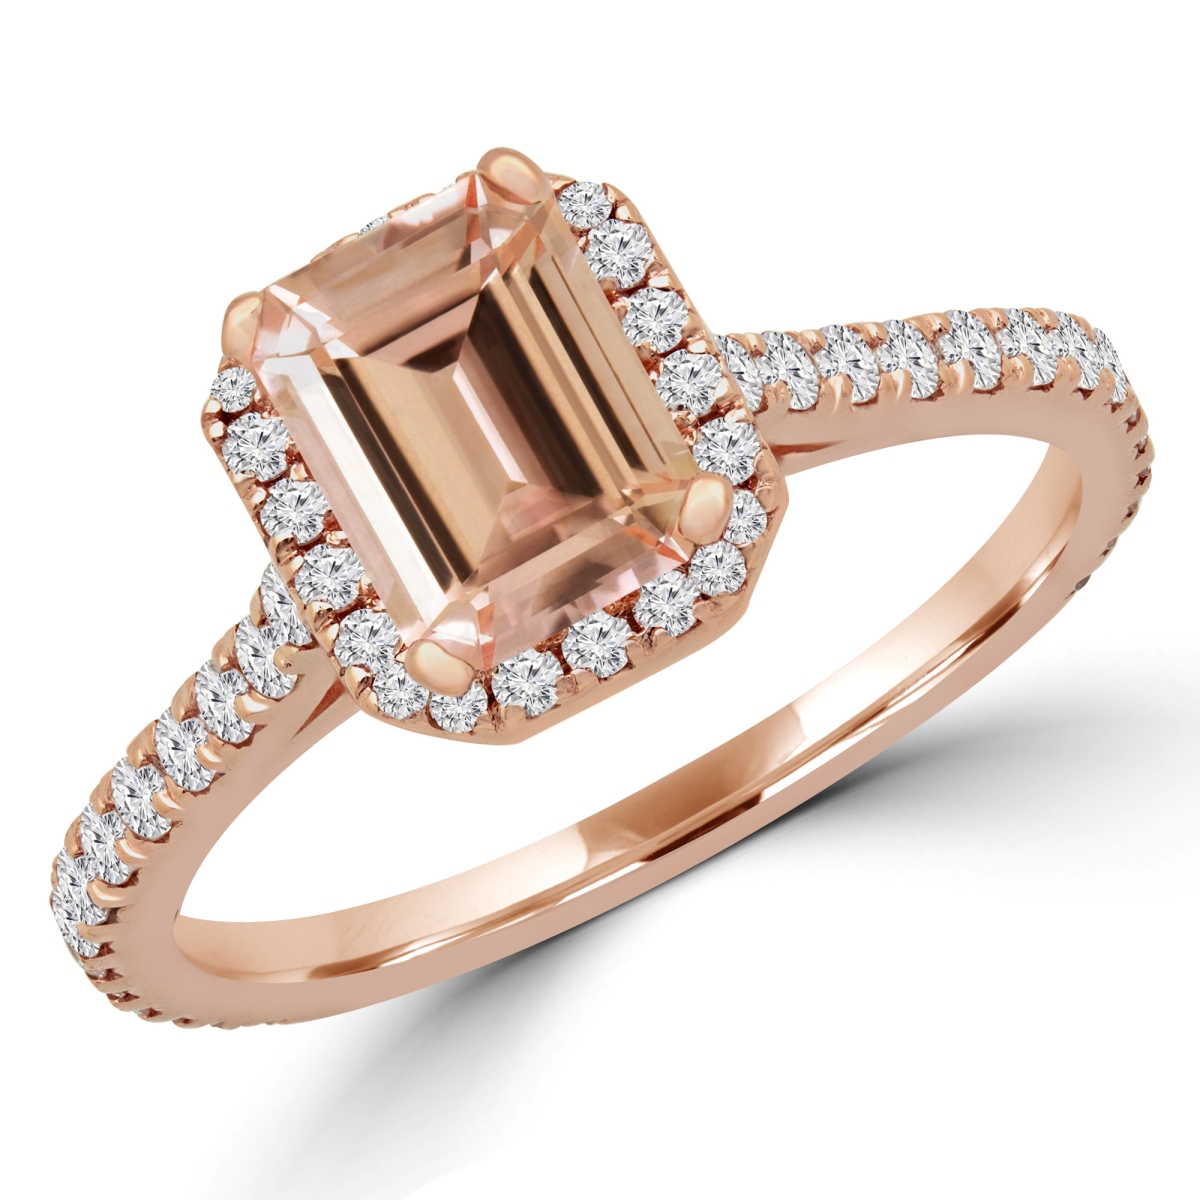 Picture of Majesty Diamonds MD180580-6.25 1.25 CTW Emerald Pink Morganite Halo Engagement Ring in 14K Rose Gold - Size 6.25